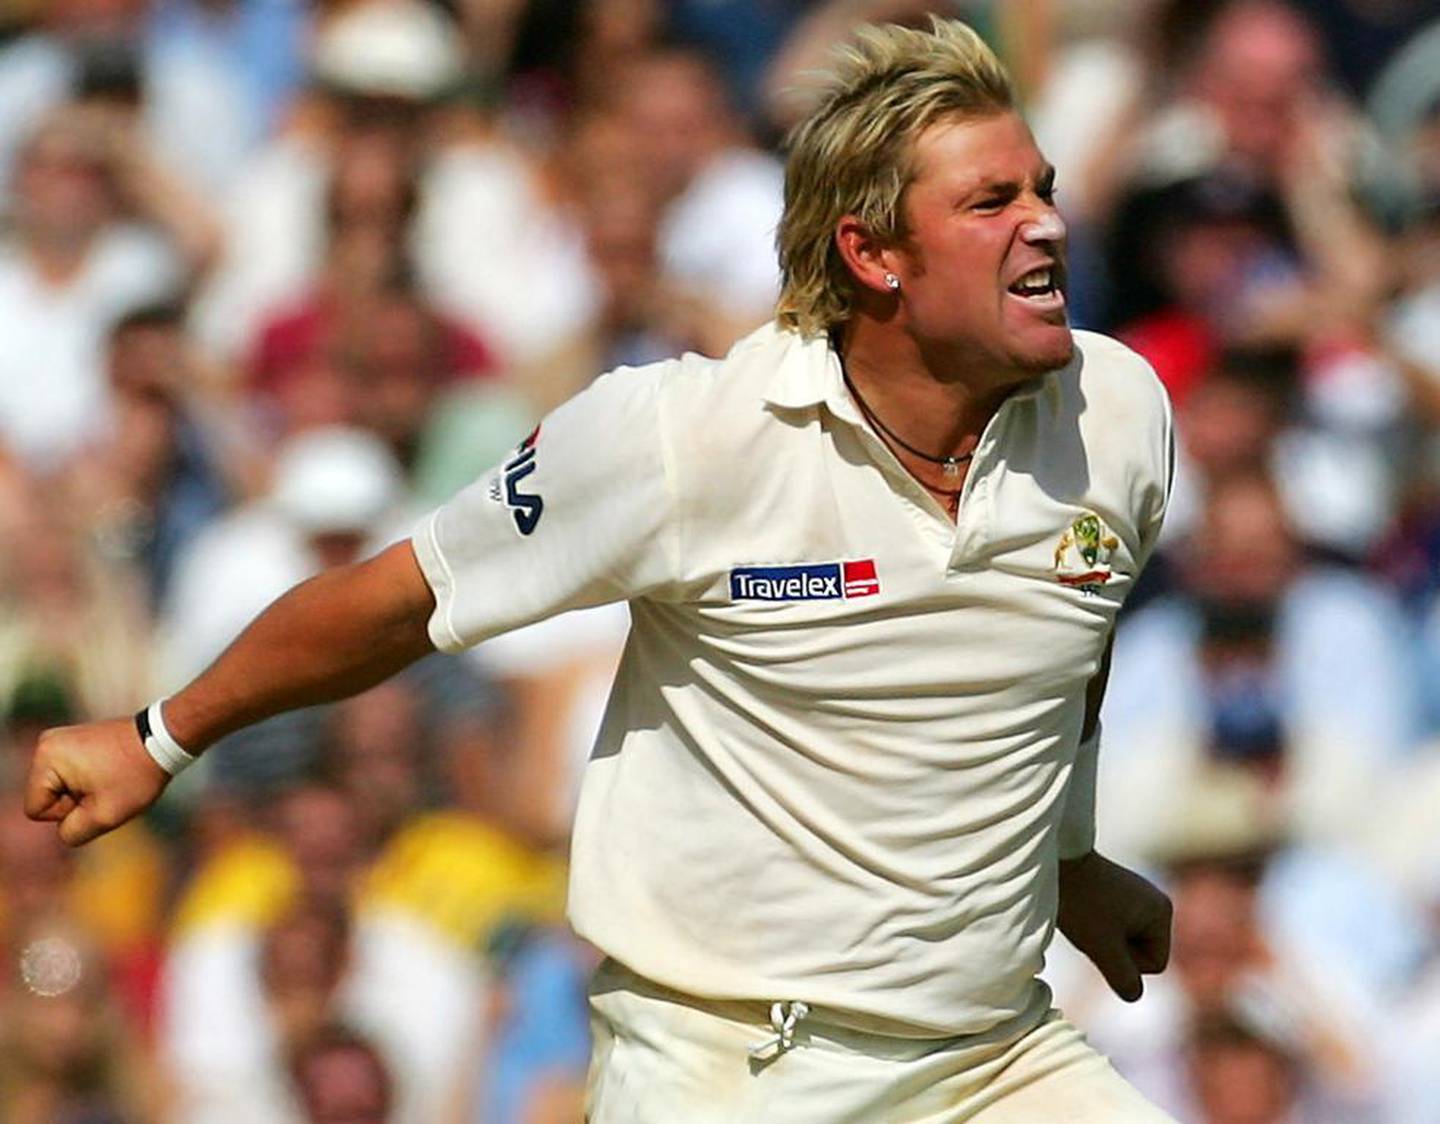 Shane Warne was a great player but his transgression from a few years earlier may have cost him his chance to lead Australia. Agencies